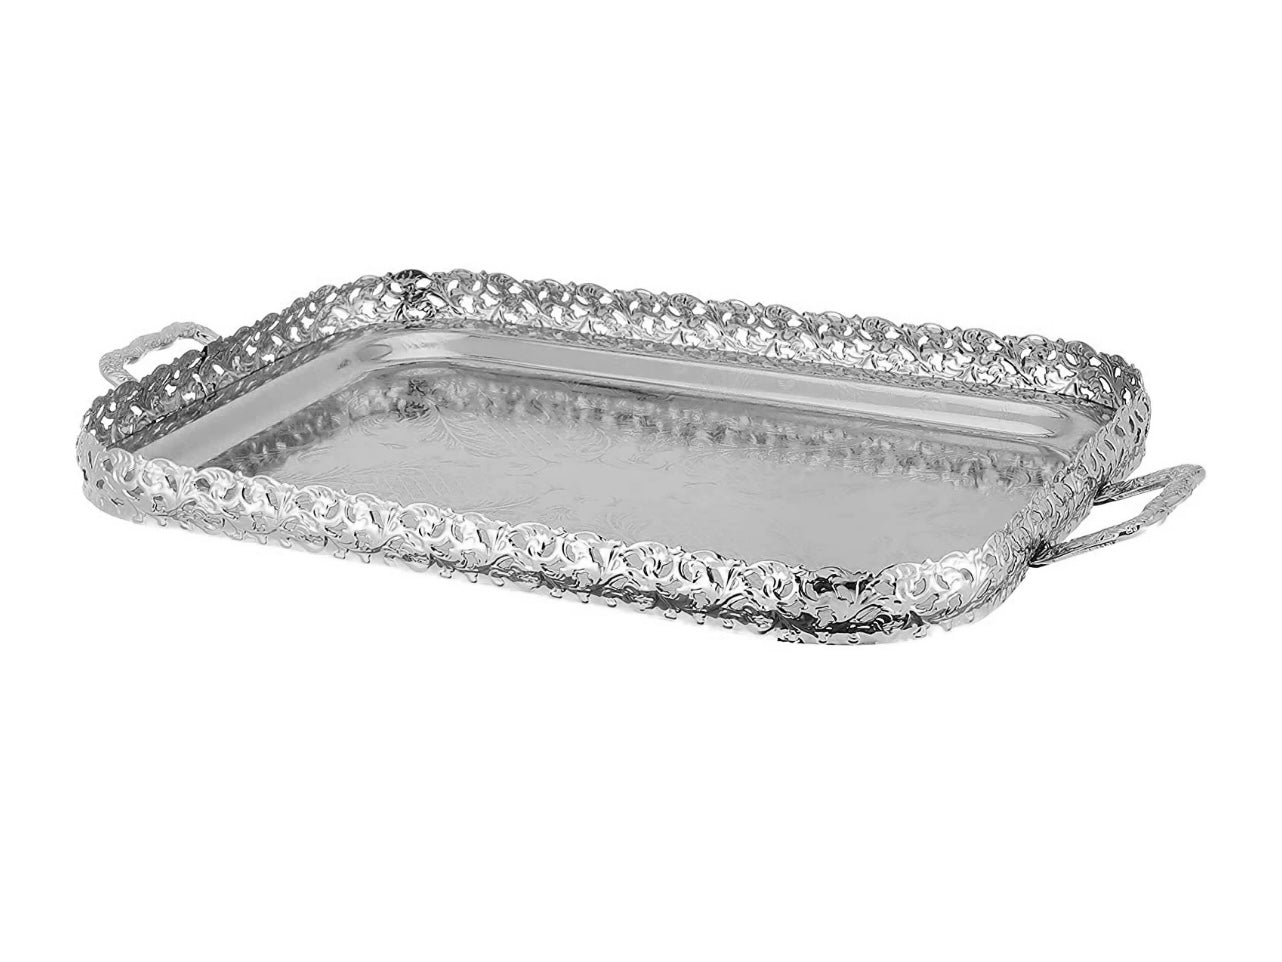 Queen Anne Rectangular Tray with Handles -51.5x29cm -Silver Plated